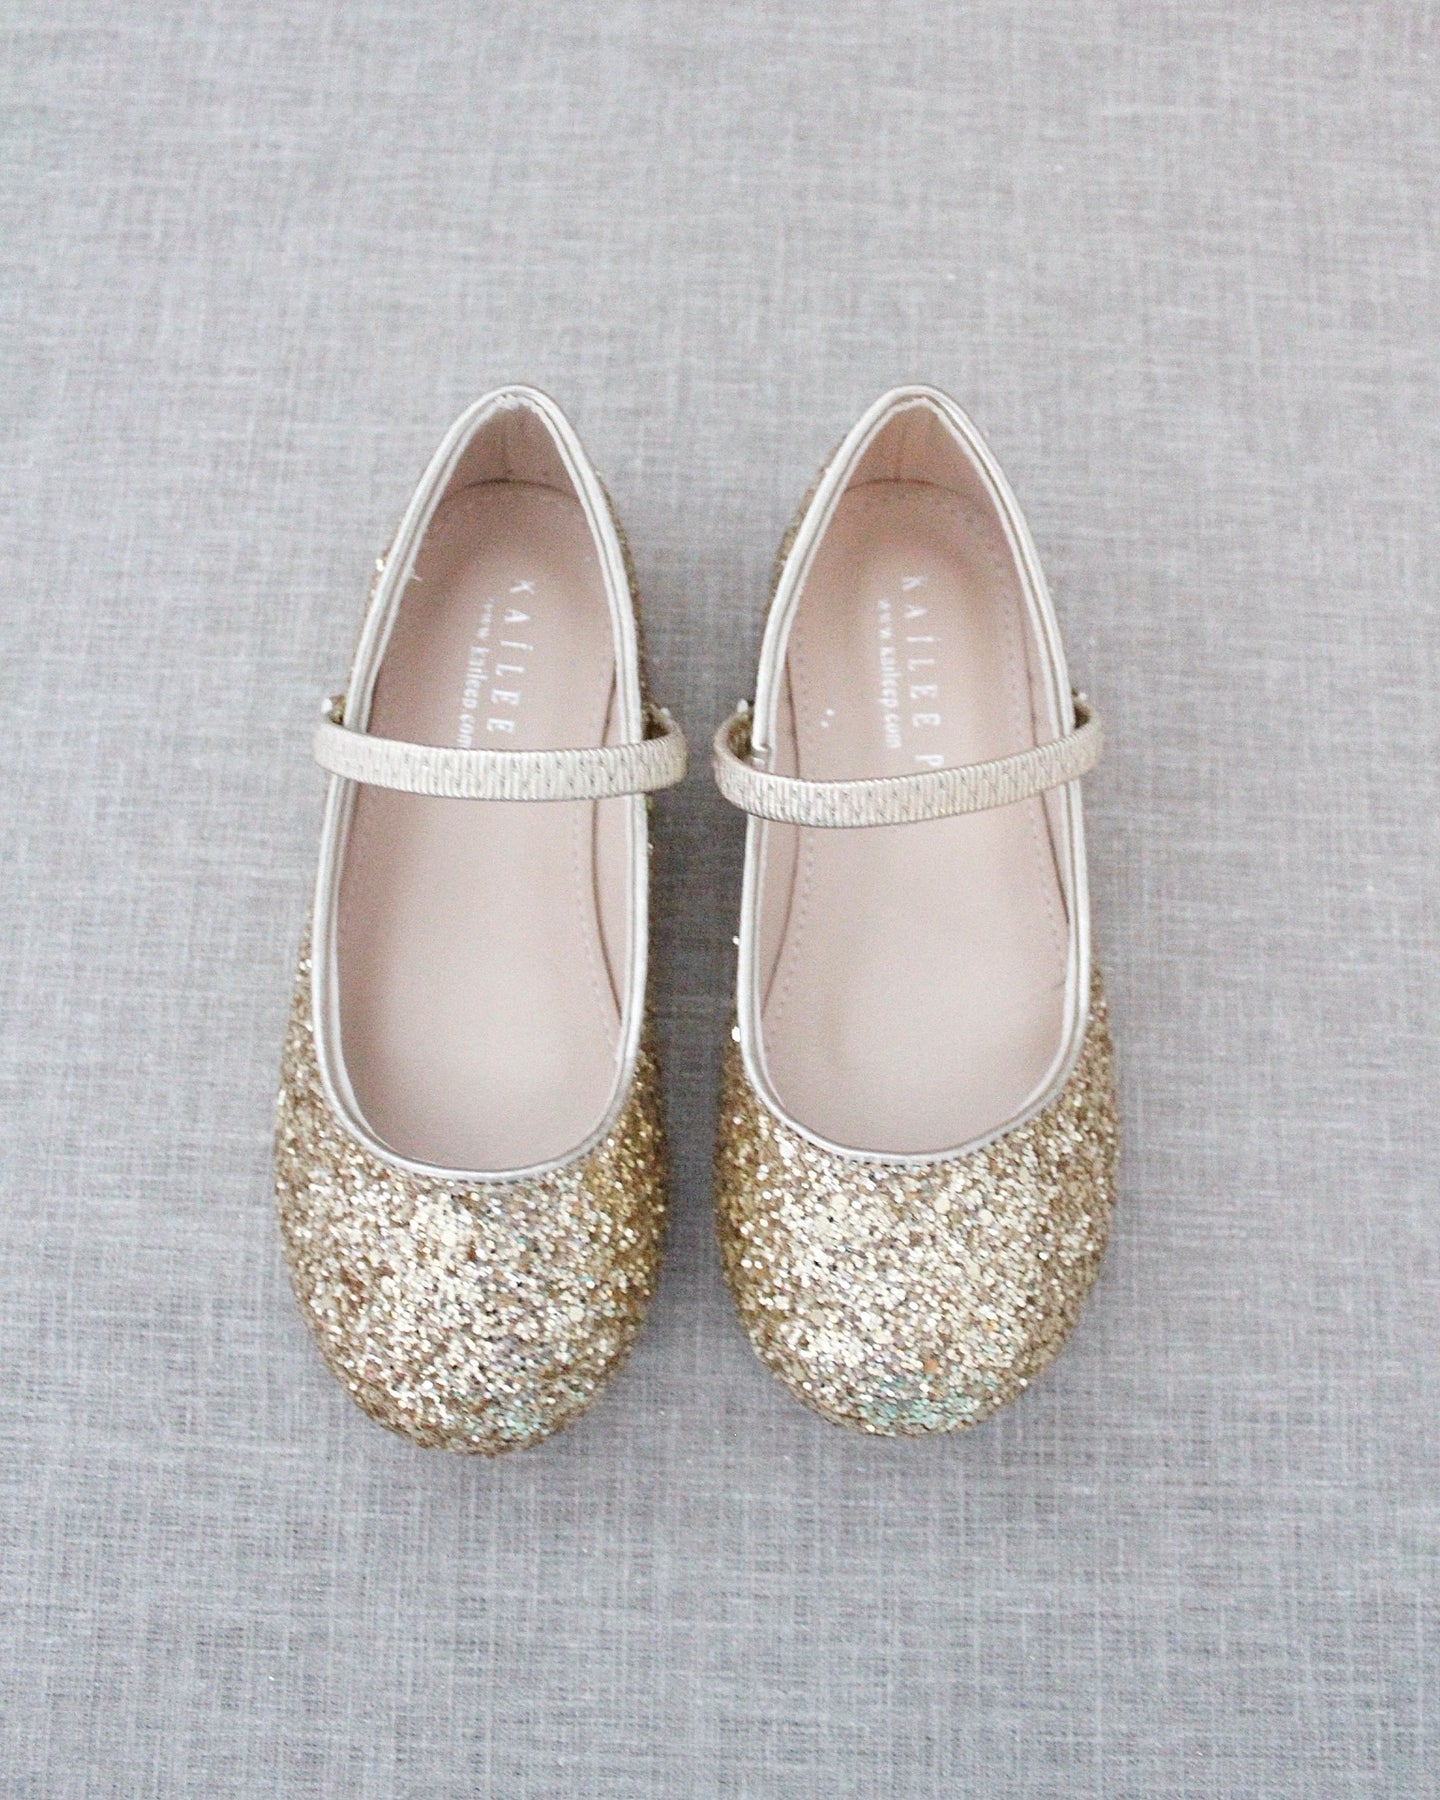 UGG Furry Lined Gold Glitter Slippers Size 4/5 Toddler | eBay